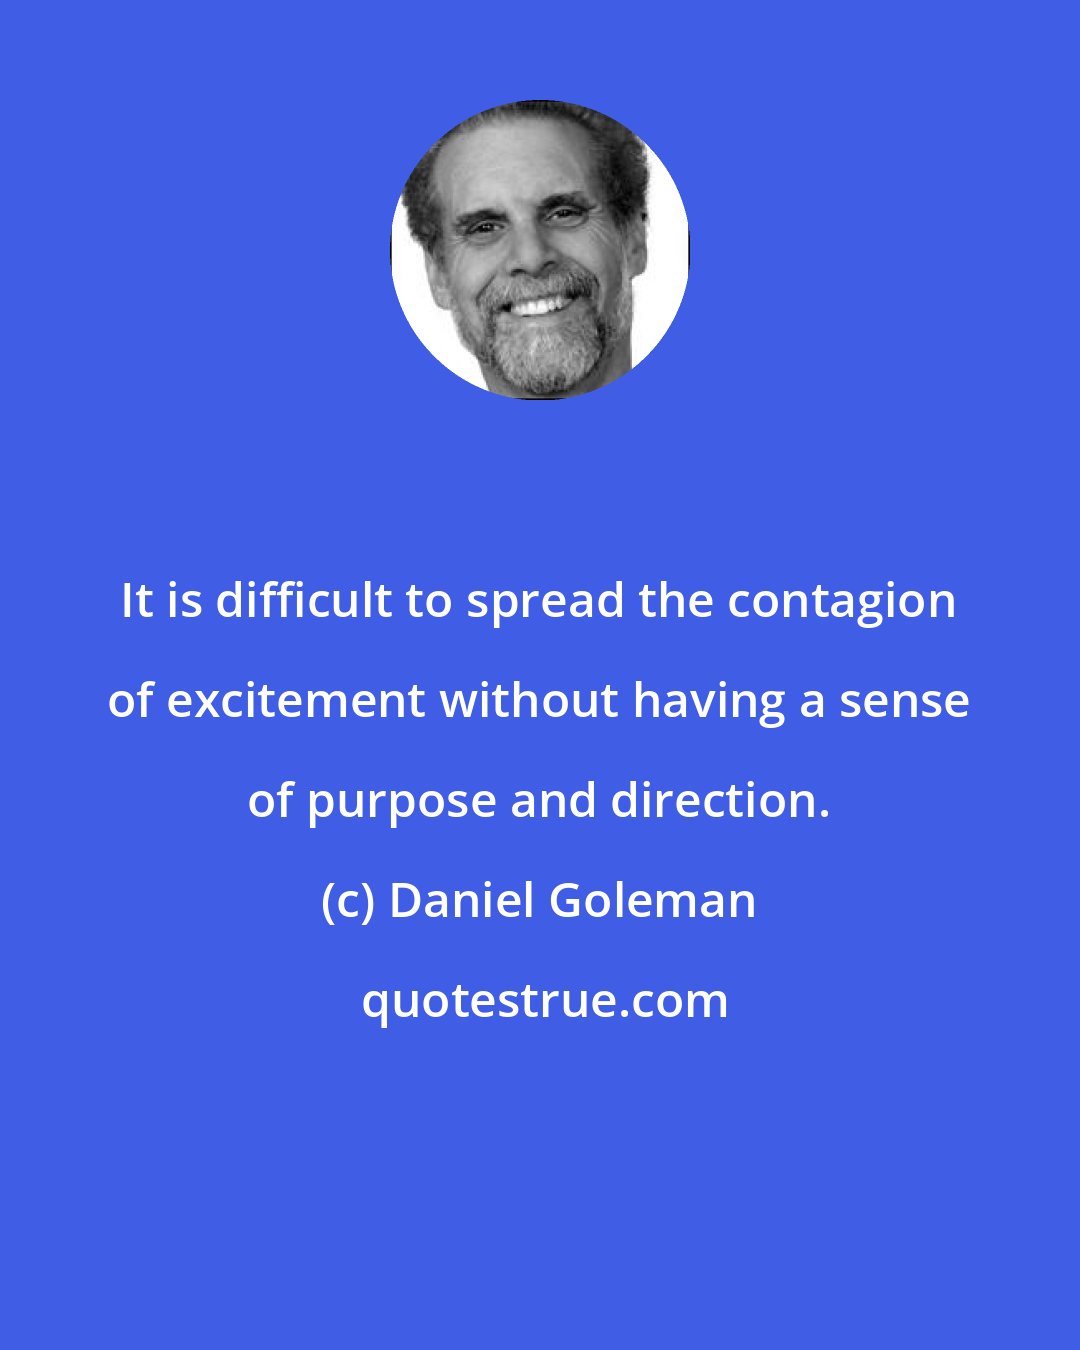 Daniel Goleman: It is difficult to spread the contagion of excitement without having a sense of purpose and direction.